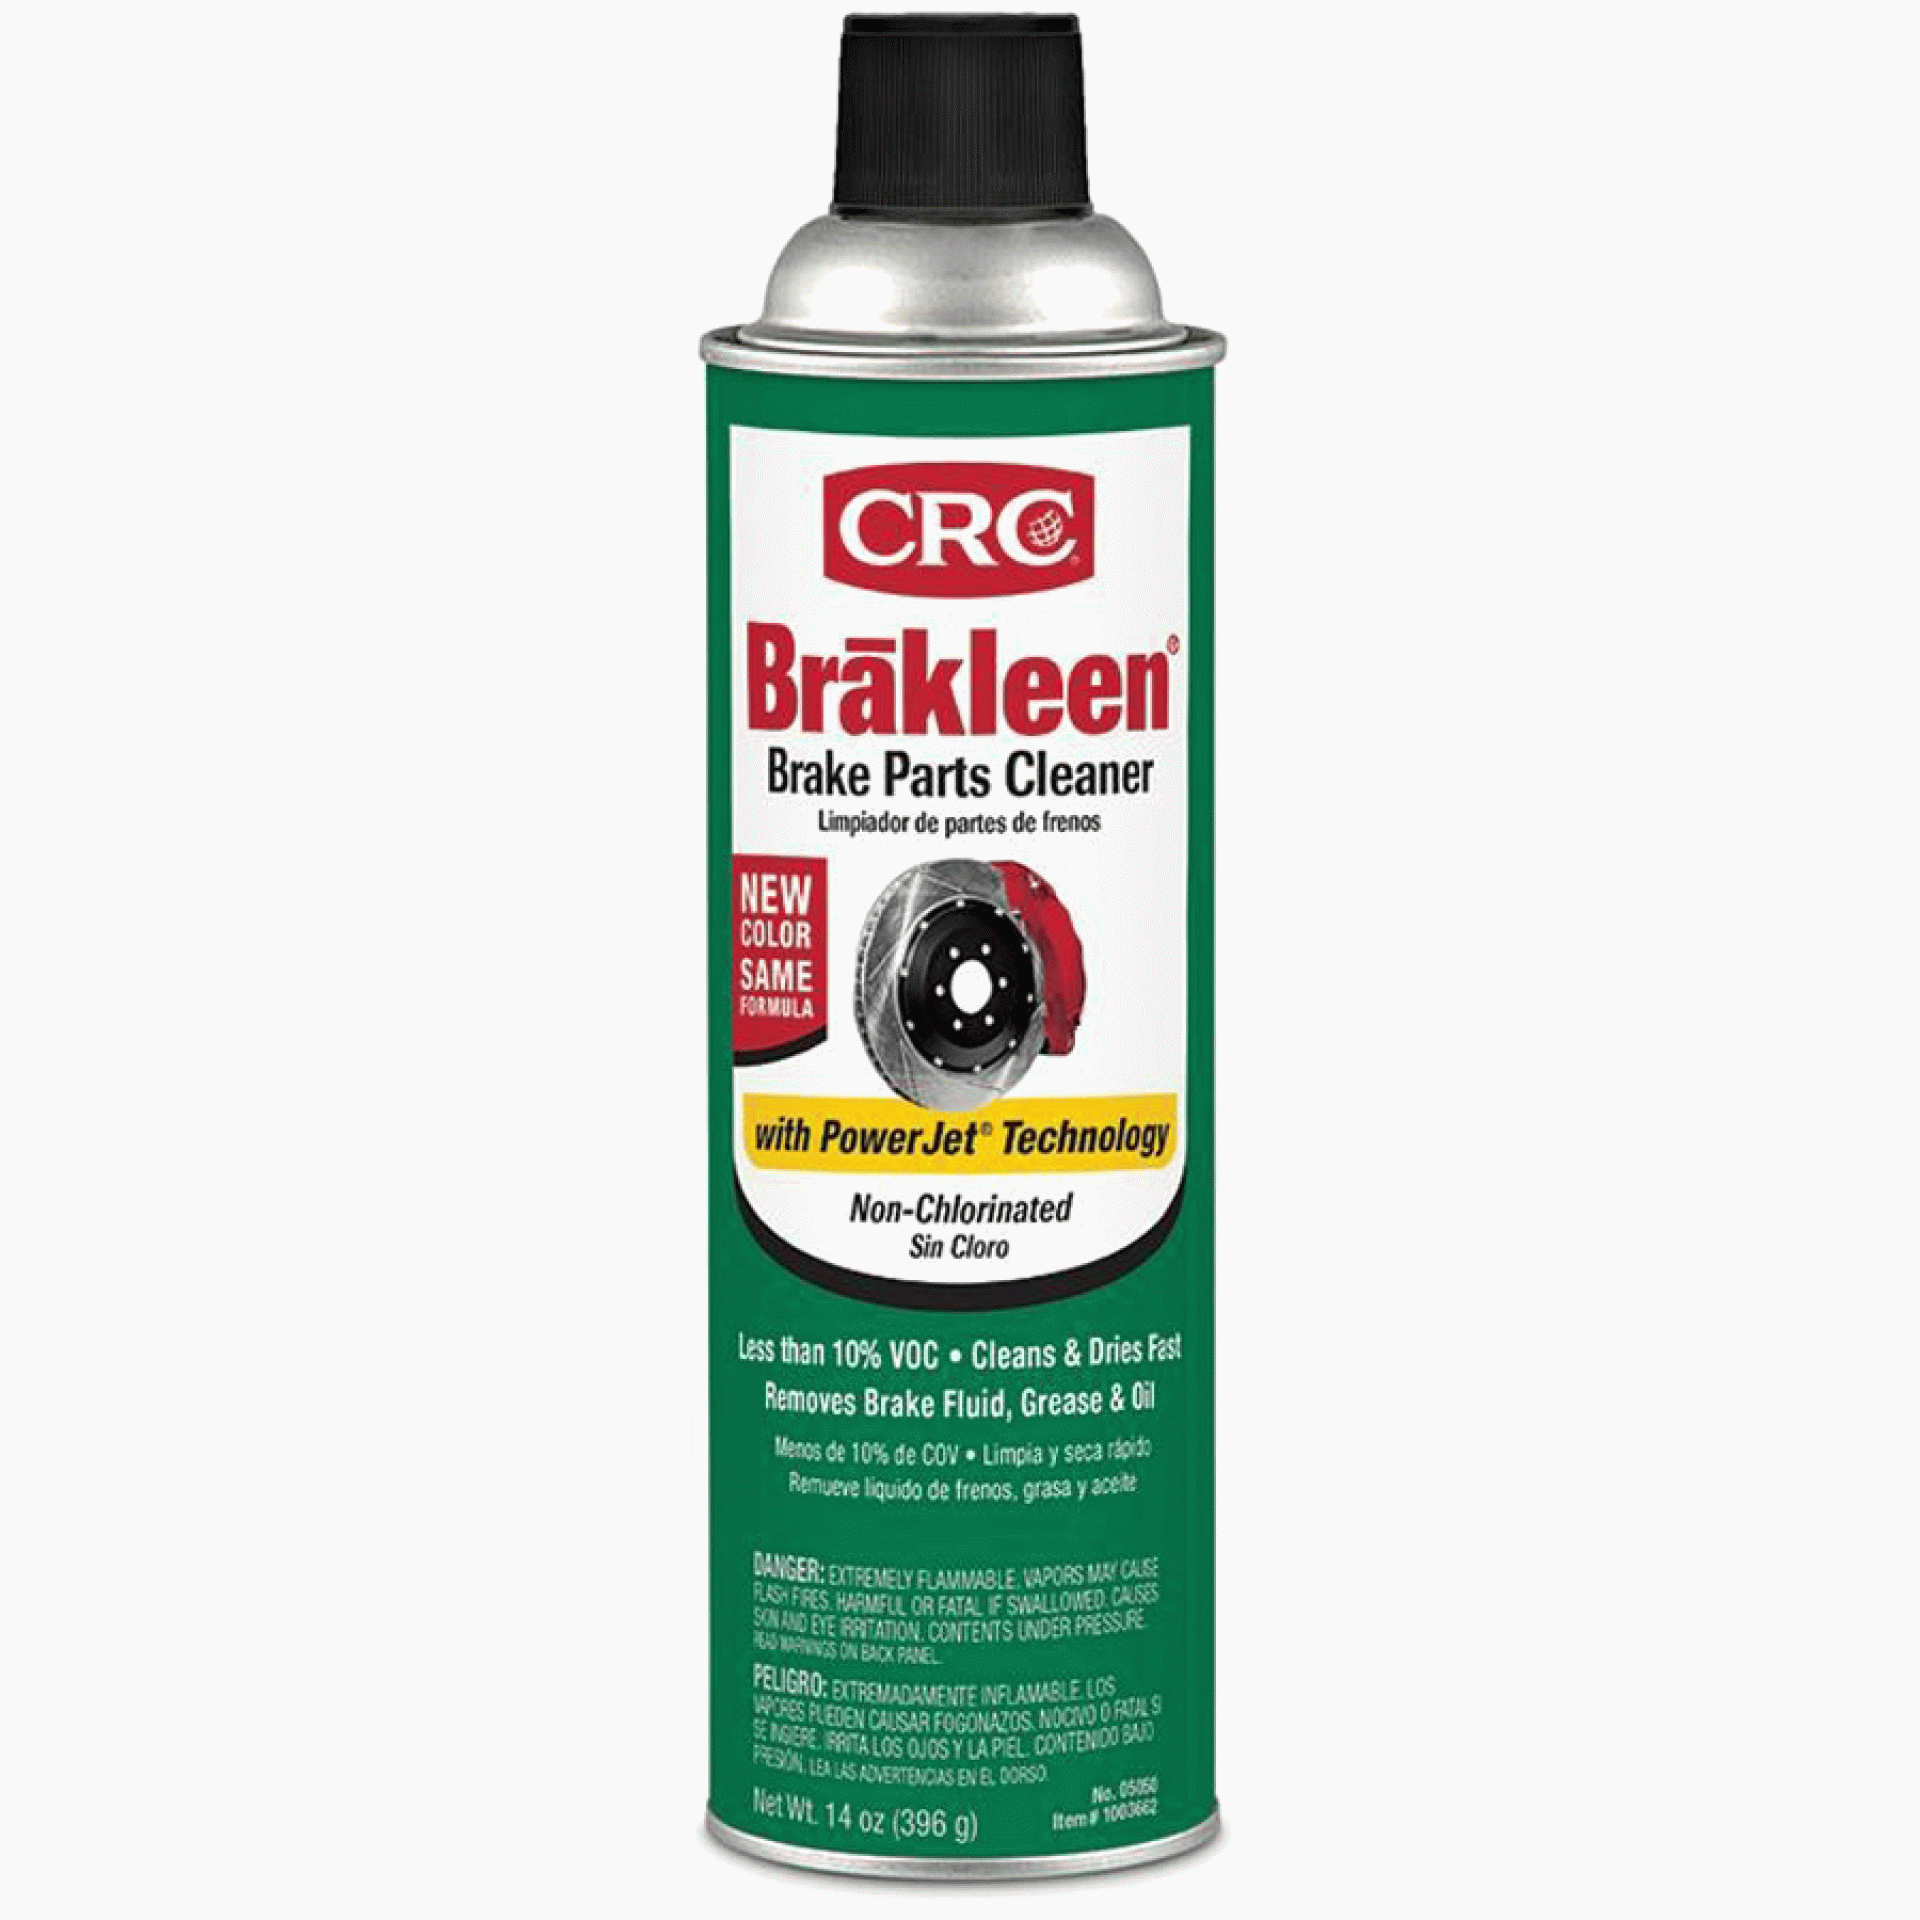 CRC CHEMICALS USA | 05050 | BRAKLEEN BRAKE PARTS CLEANER NON-CHLORINATED 50 STATE FORMULA